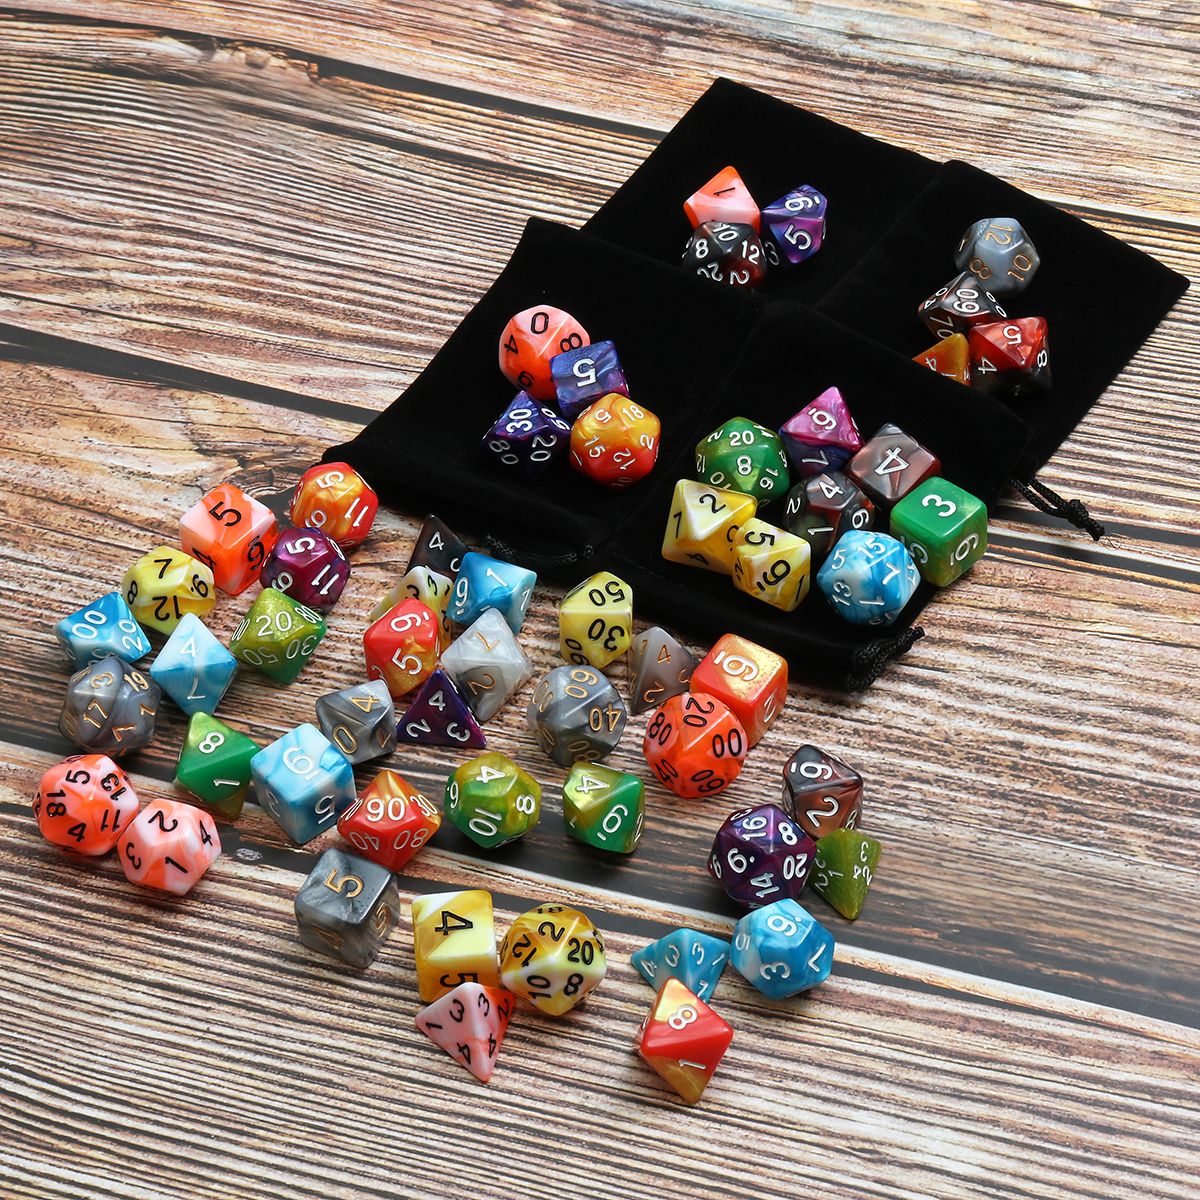 495670Pcs-Polyhedral-Dices-for-Dungeons-amp-Dragons-Desktop-Games-With-Storage-Bags-1646830